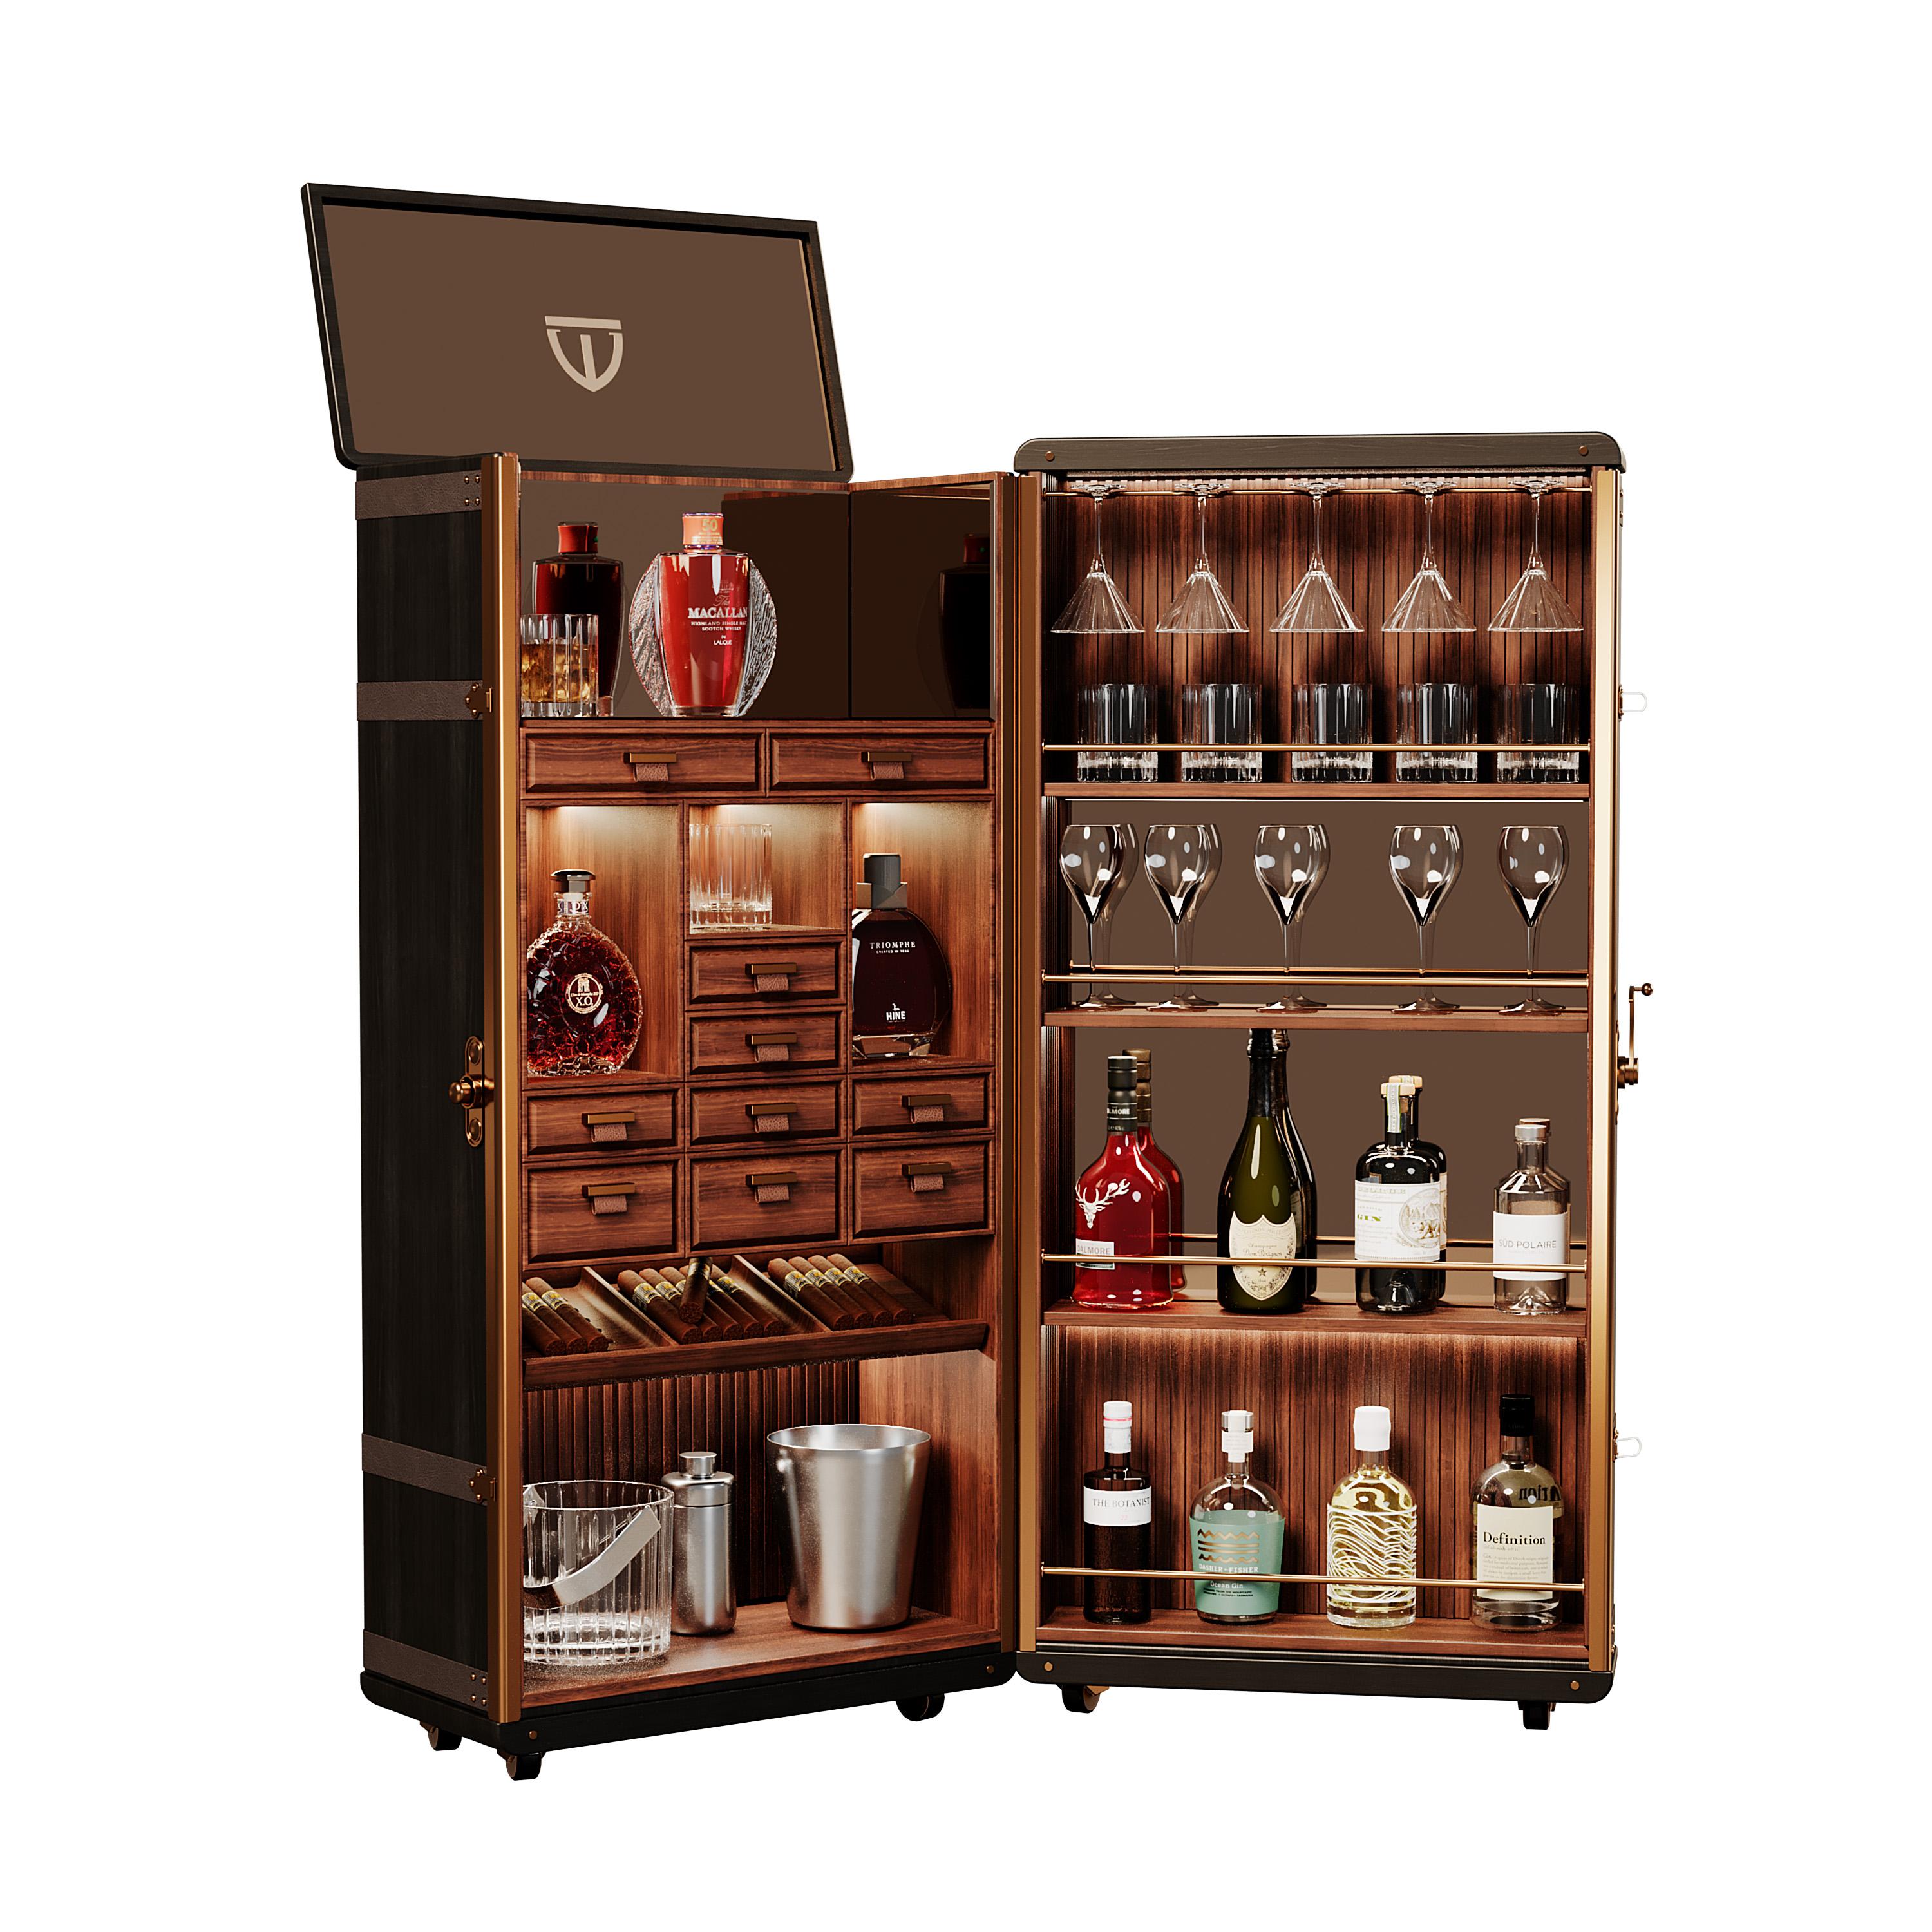 The Gentlemen’s Club distinguishes itself through its exclusive and singular environment. In order to achieve uniqueness, distinctive pieces are needed, and the Bowmore Bar Cabinet is a perfect example.
Wood Tailors turned a craftsmanship trunk